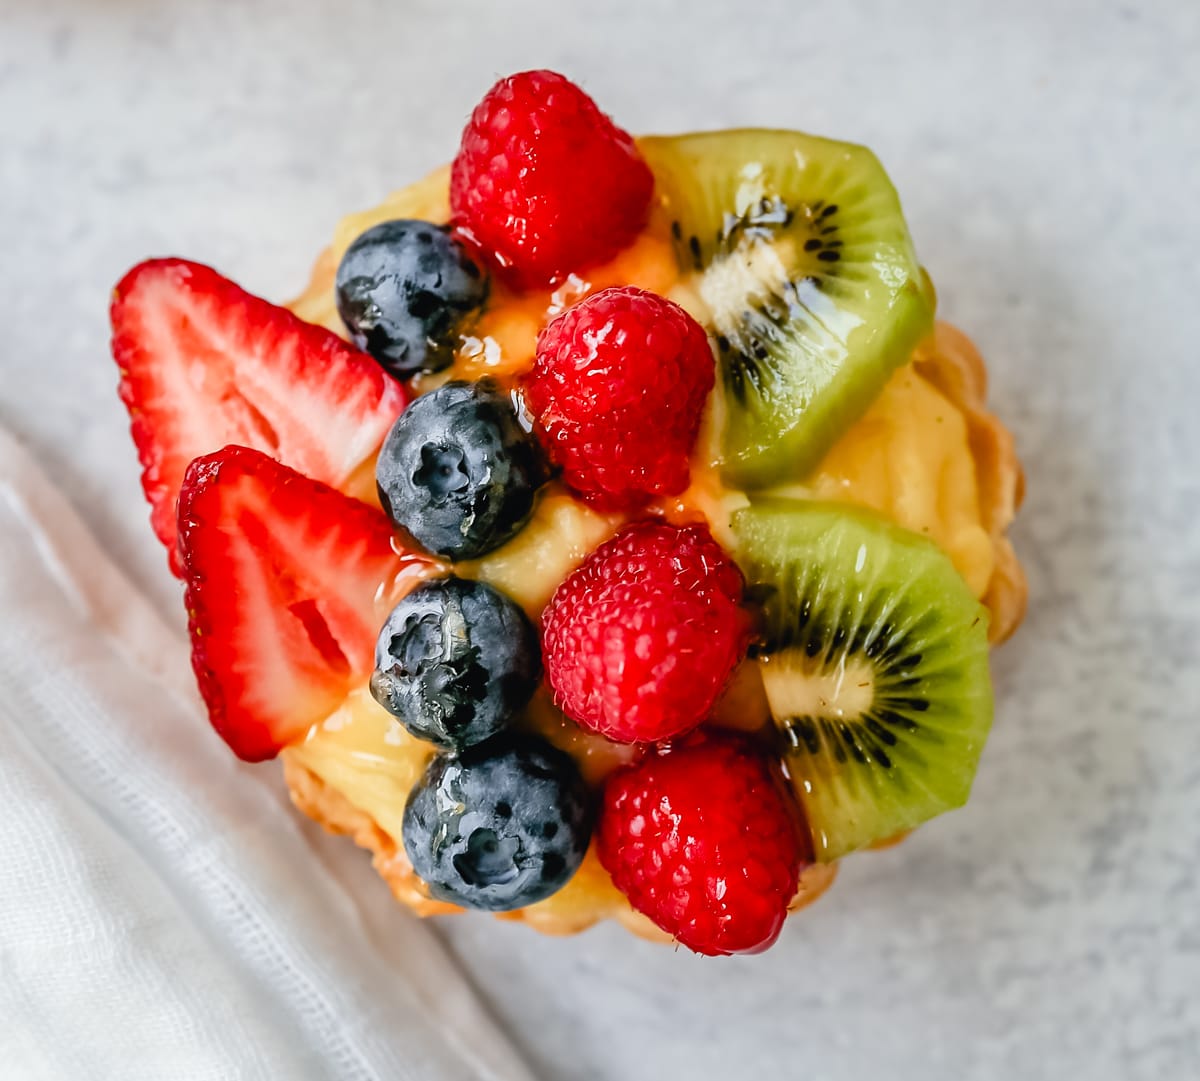 Fruit Tart with Pastry Cream This French fruit tart is made with a flaky, buttery pie crust, filled with homemade vanilla bean pastry cream, and topped with fresh fruit.